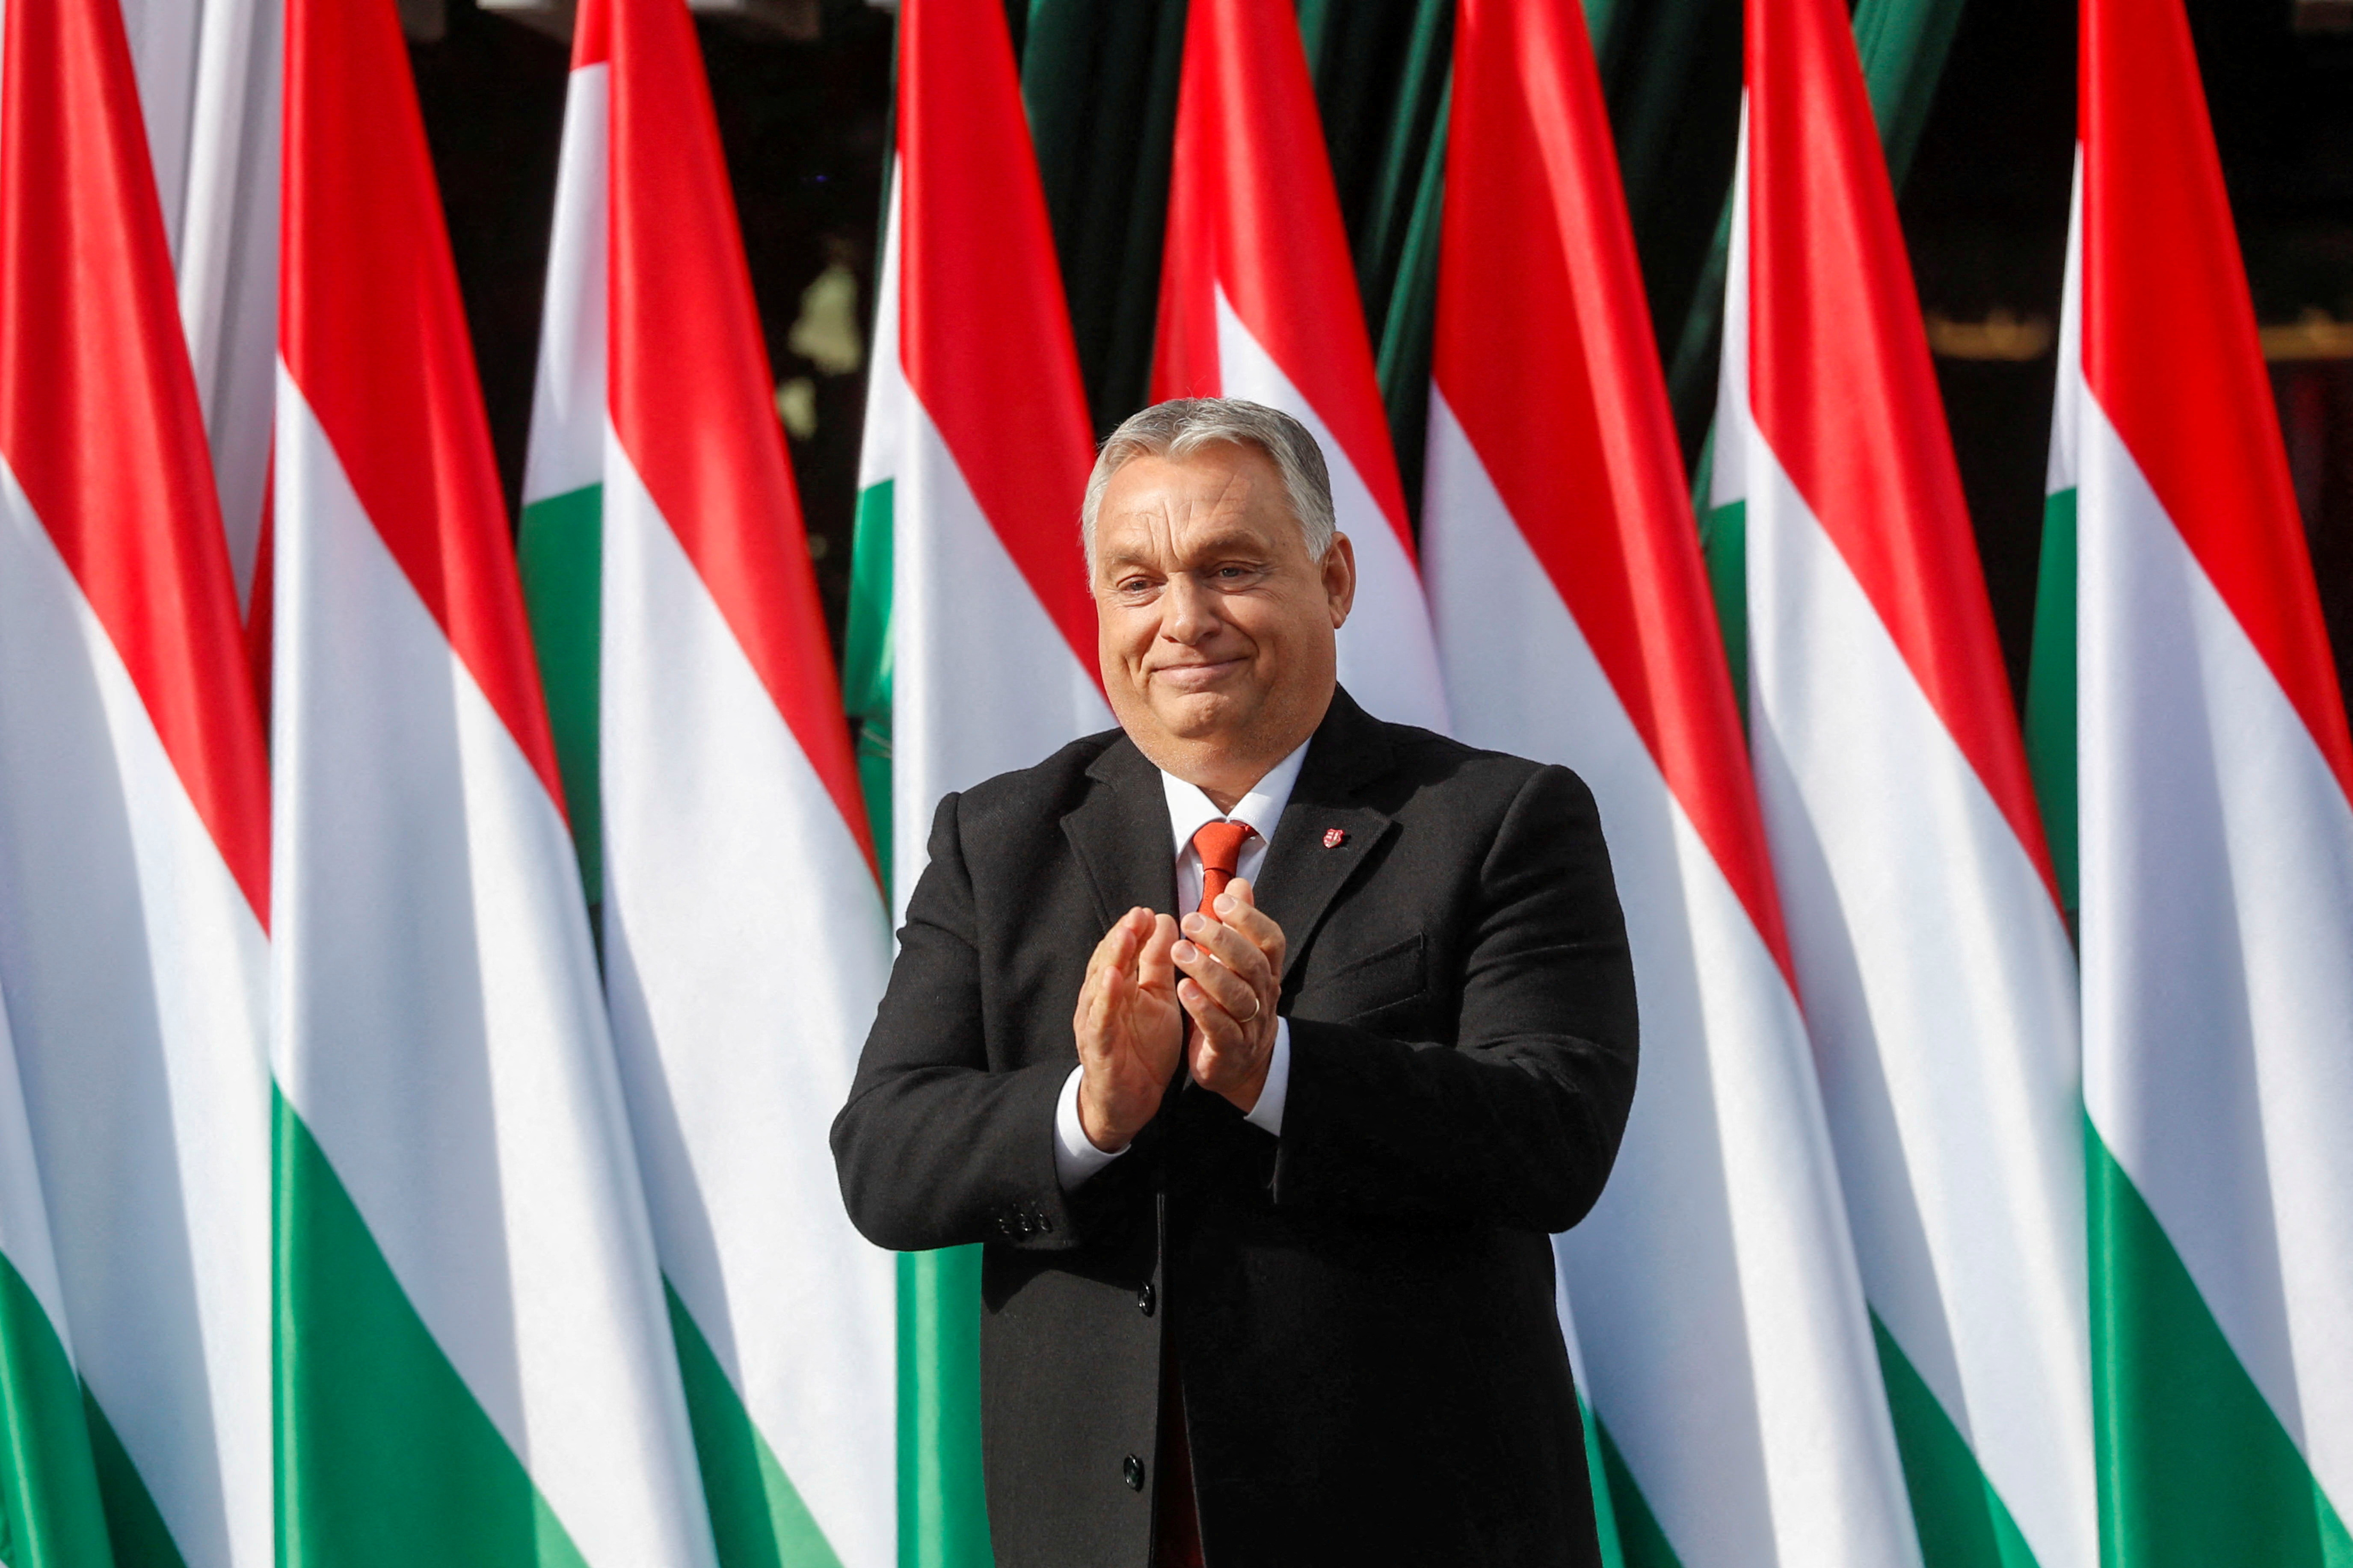 Hungarian PM Viktor Orban delivers a speech for National Day, in Zalaegerszeg